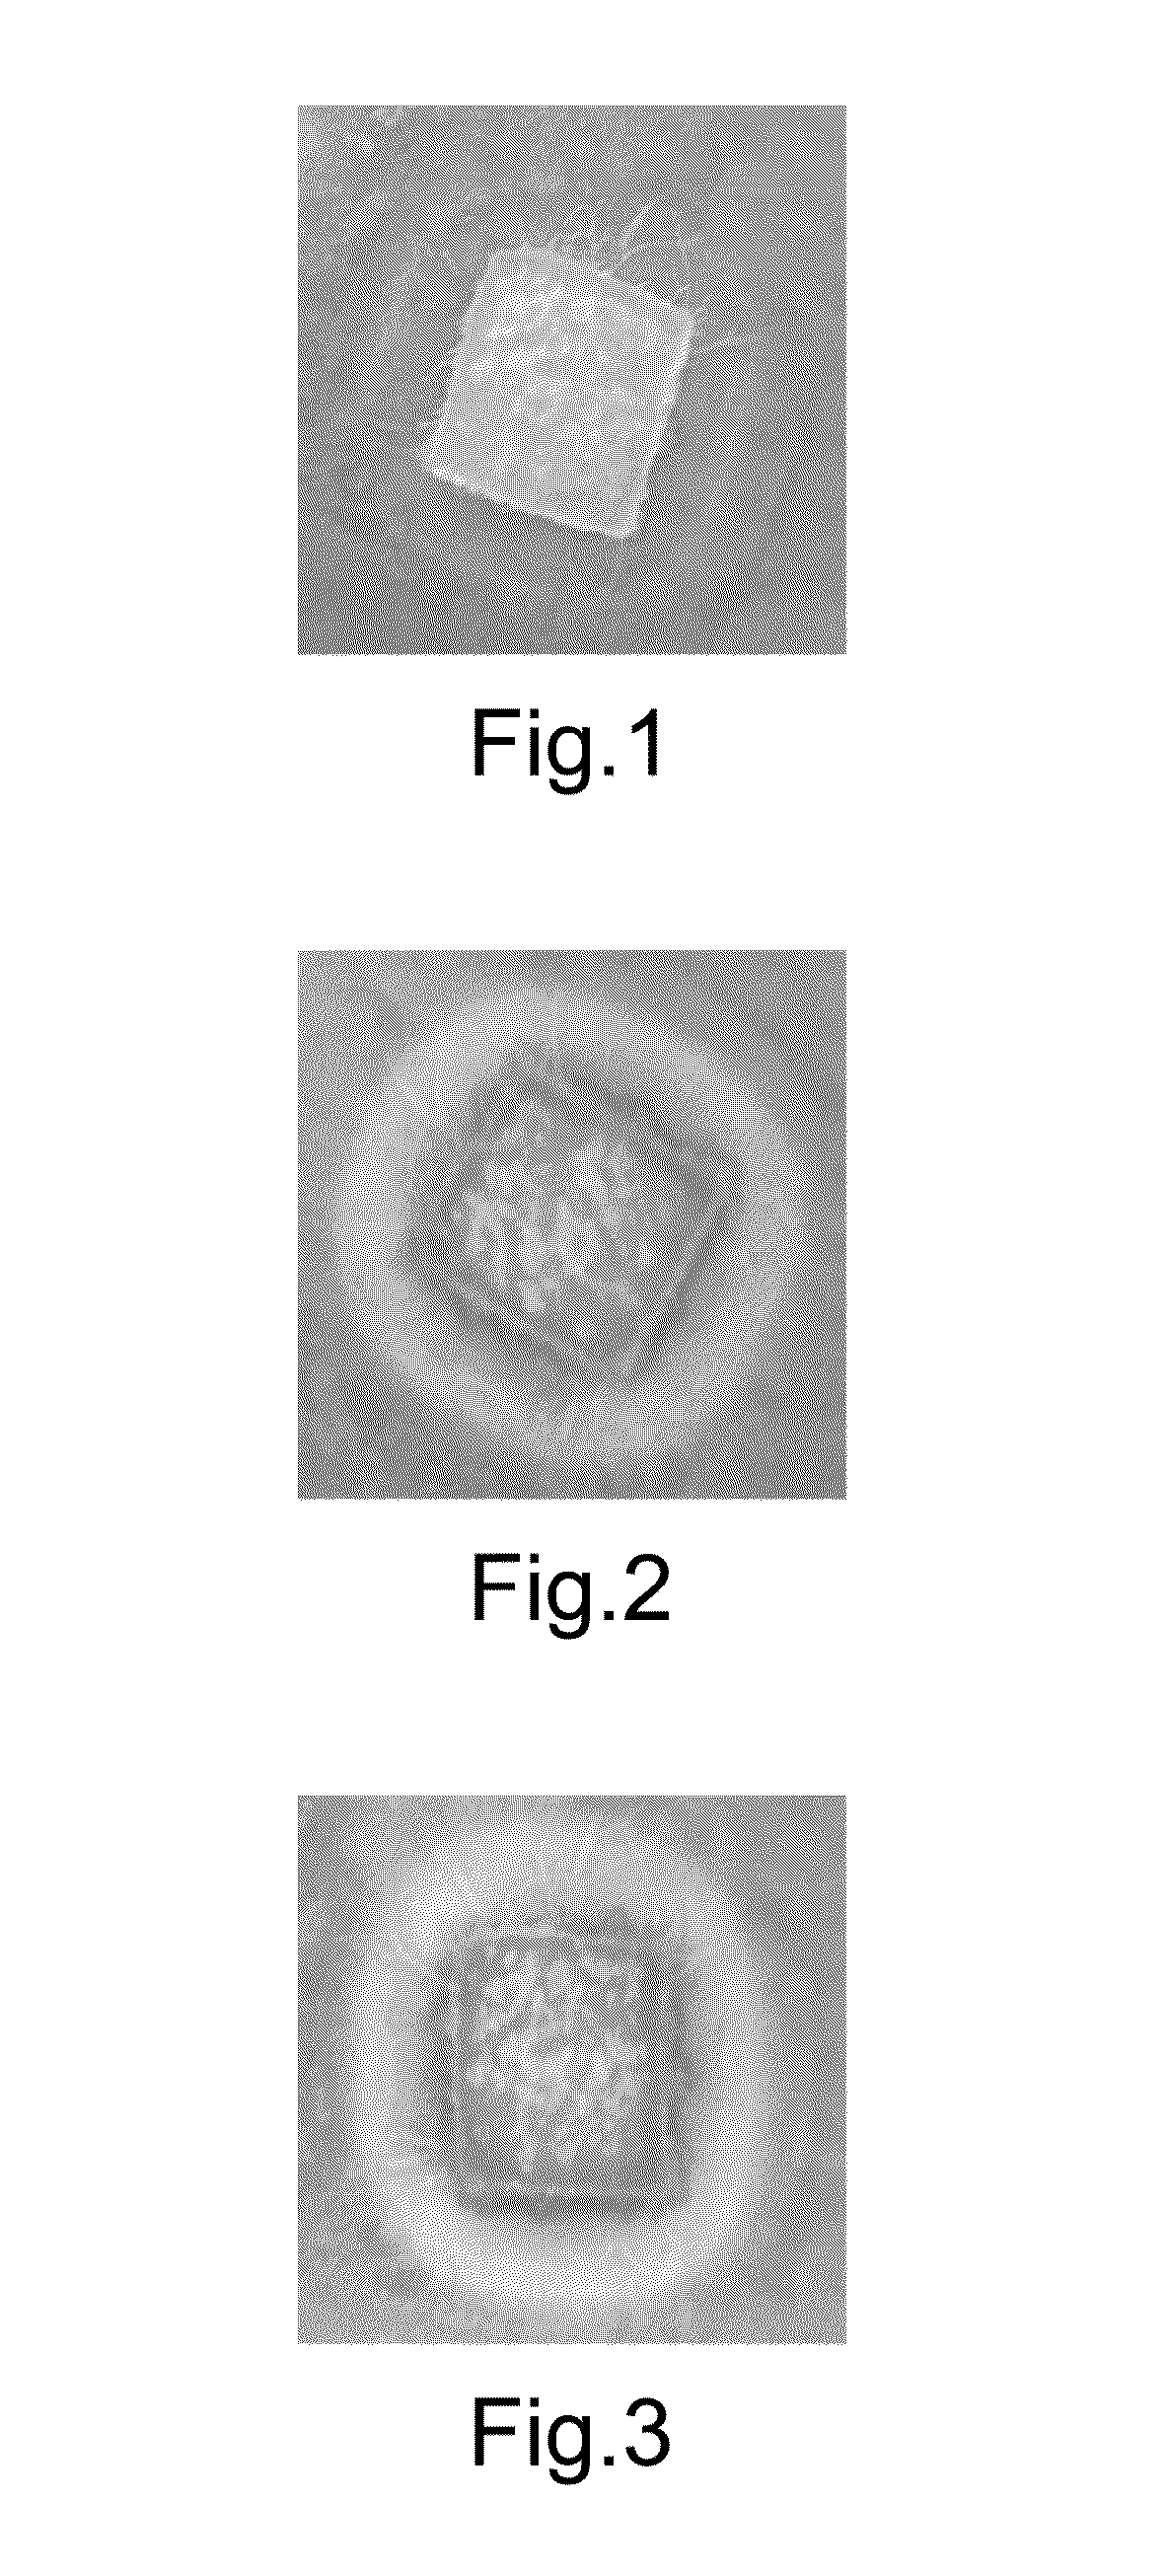 Silver containing antimicrobial fibre, fabric and wound dressing and its method of manufacturing